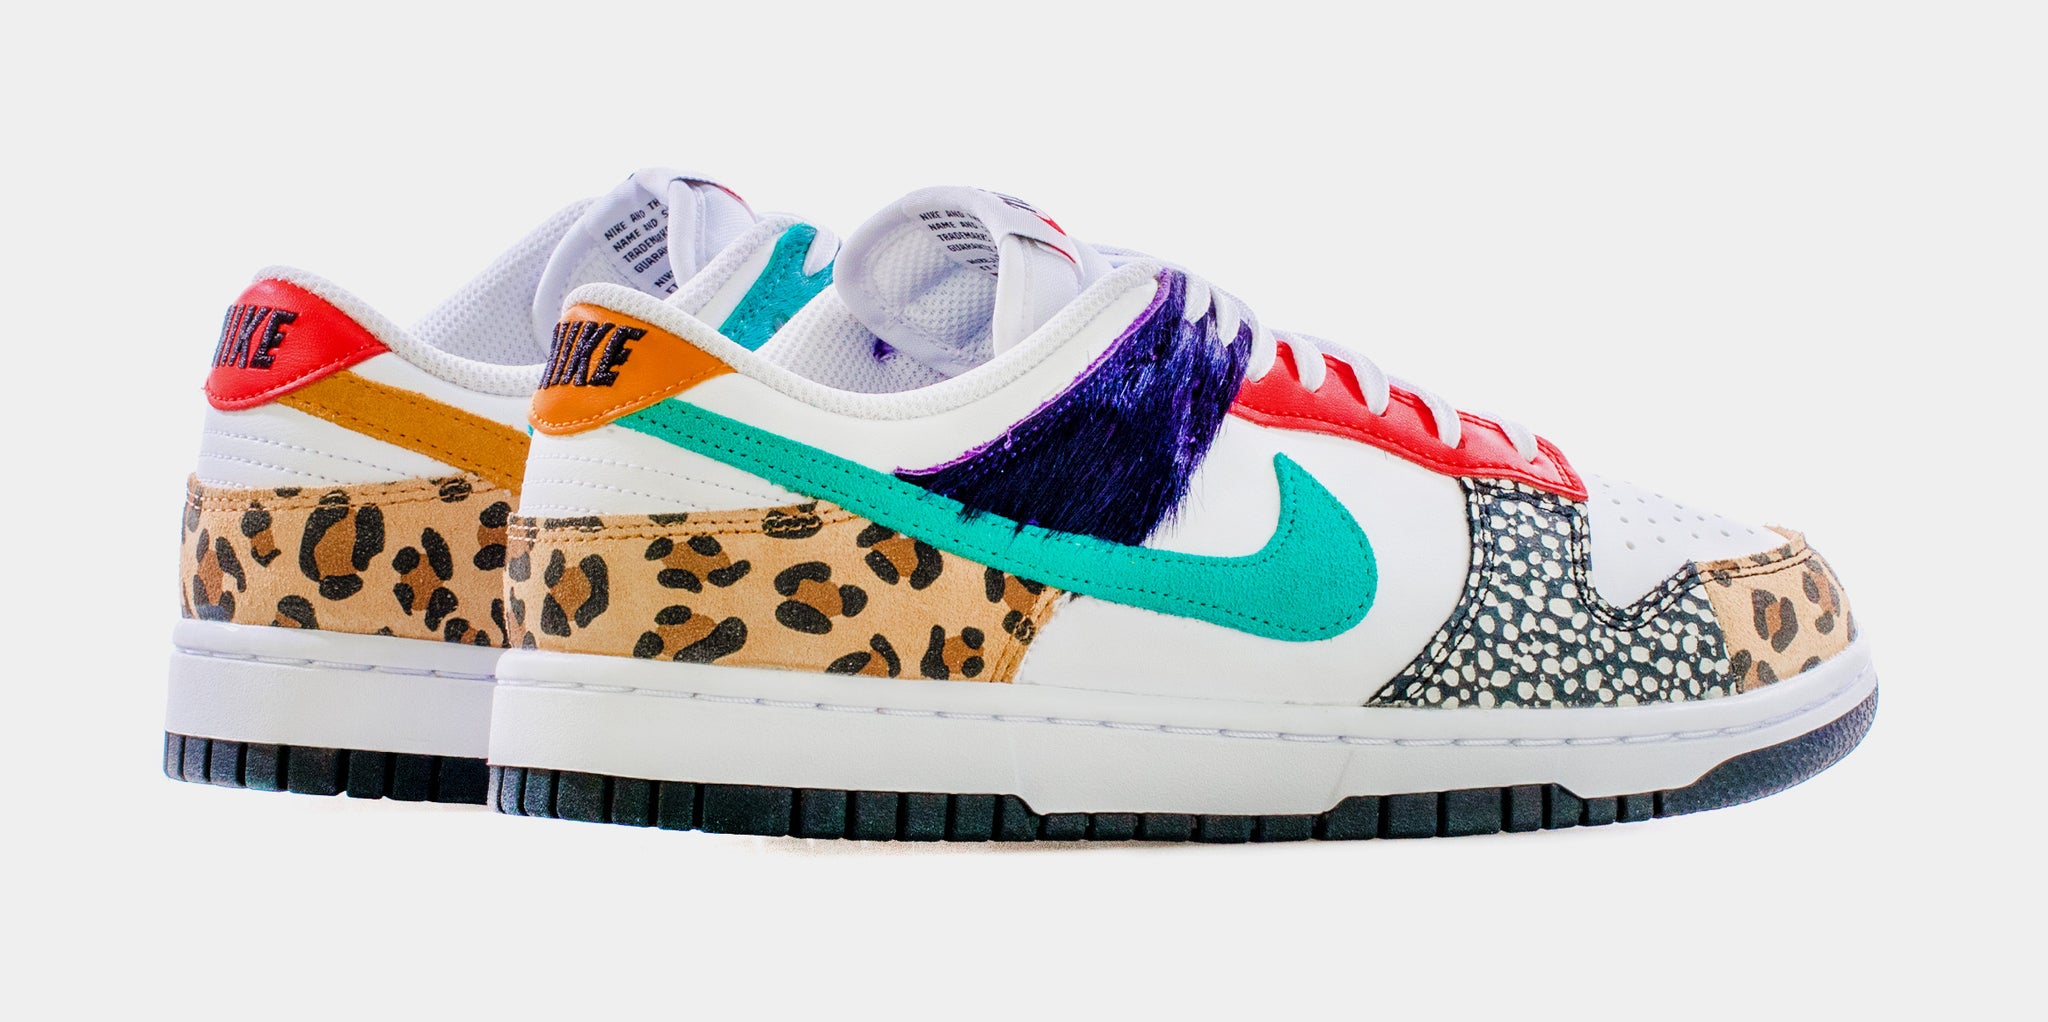 Nike WMNS Dunk Low "Patchwork"